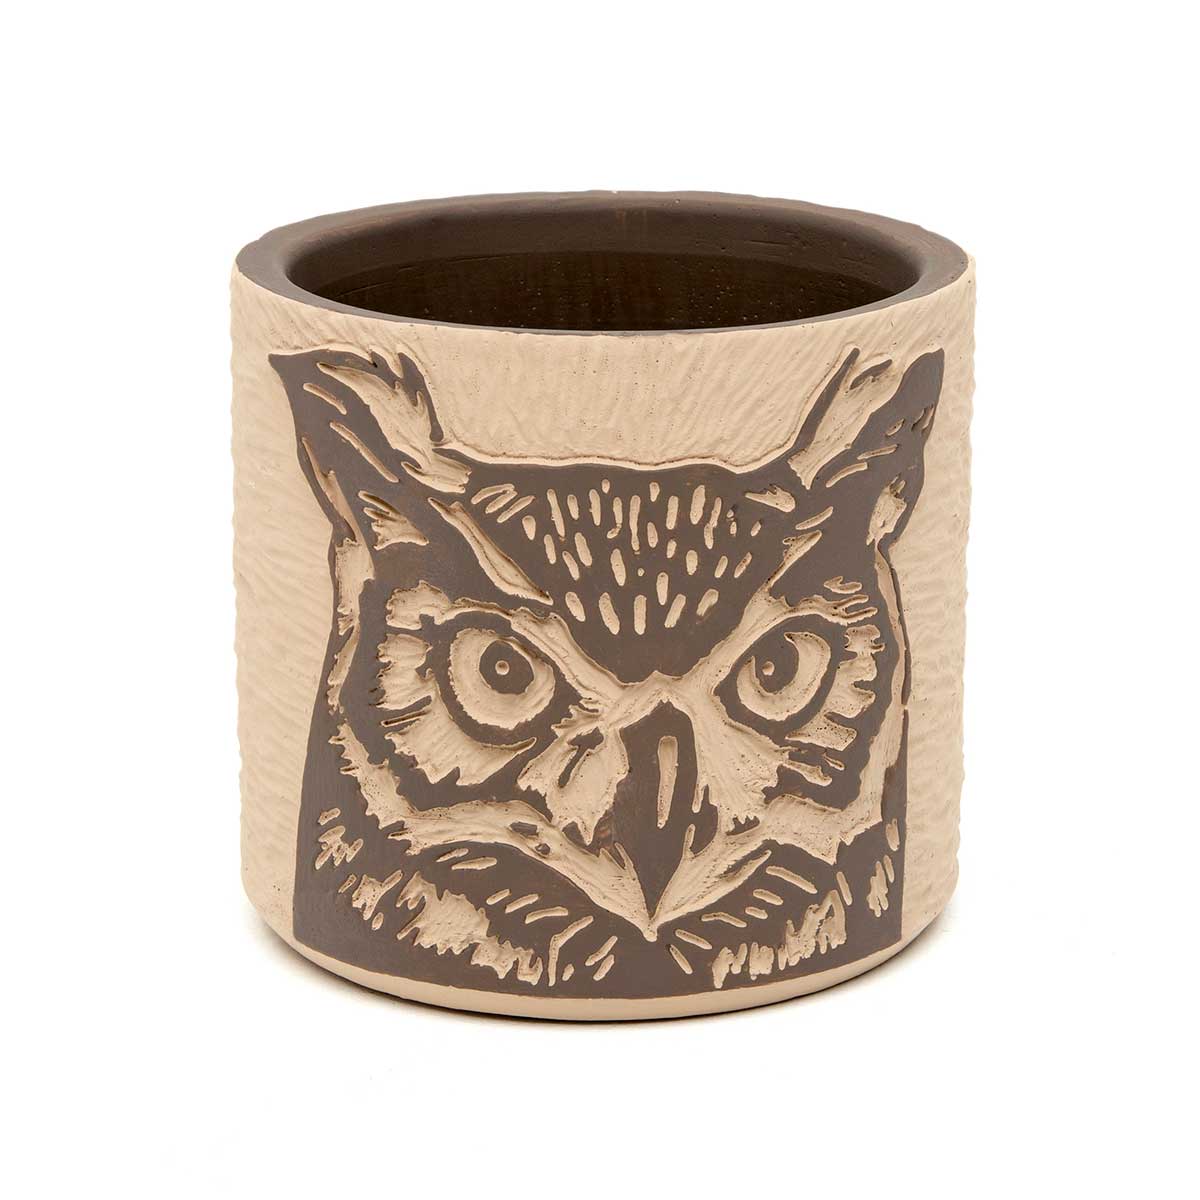 POT BARNYARD OWL SMALL 4.5IN X 4IN BROWN/BEIGE CONCRETE - Click Image to Close